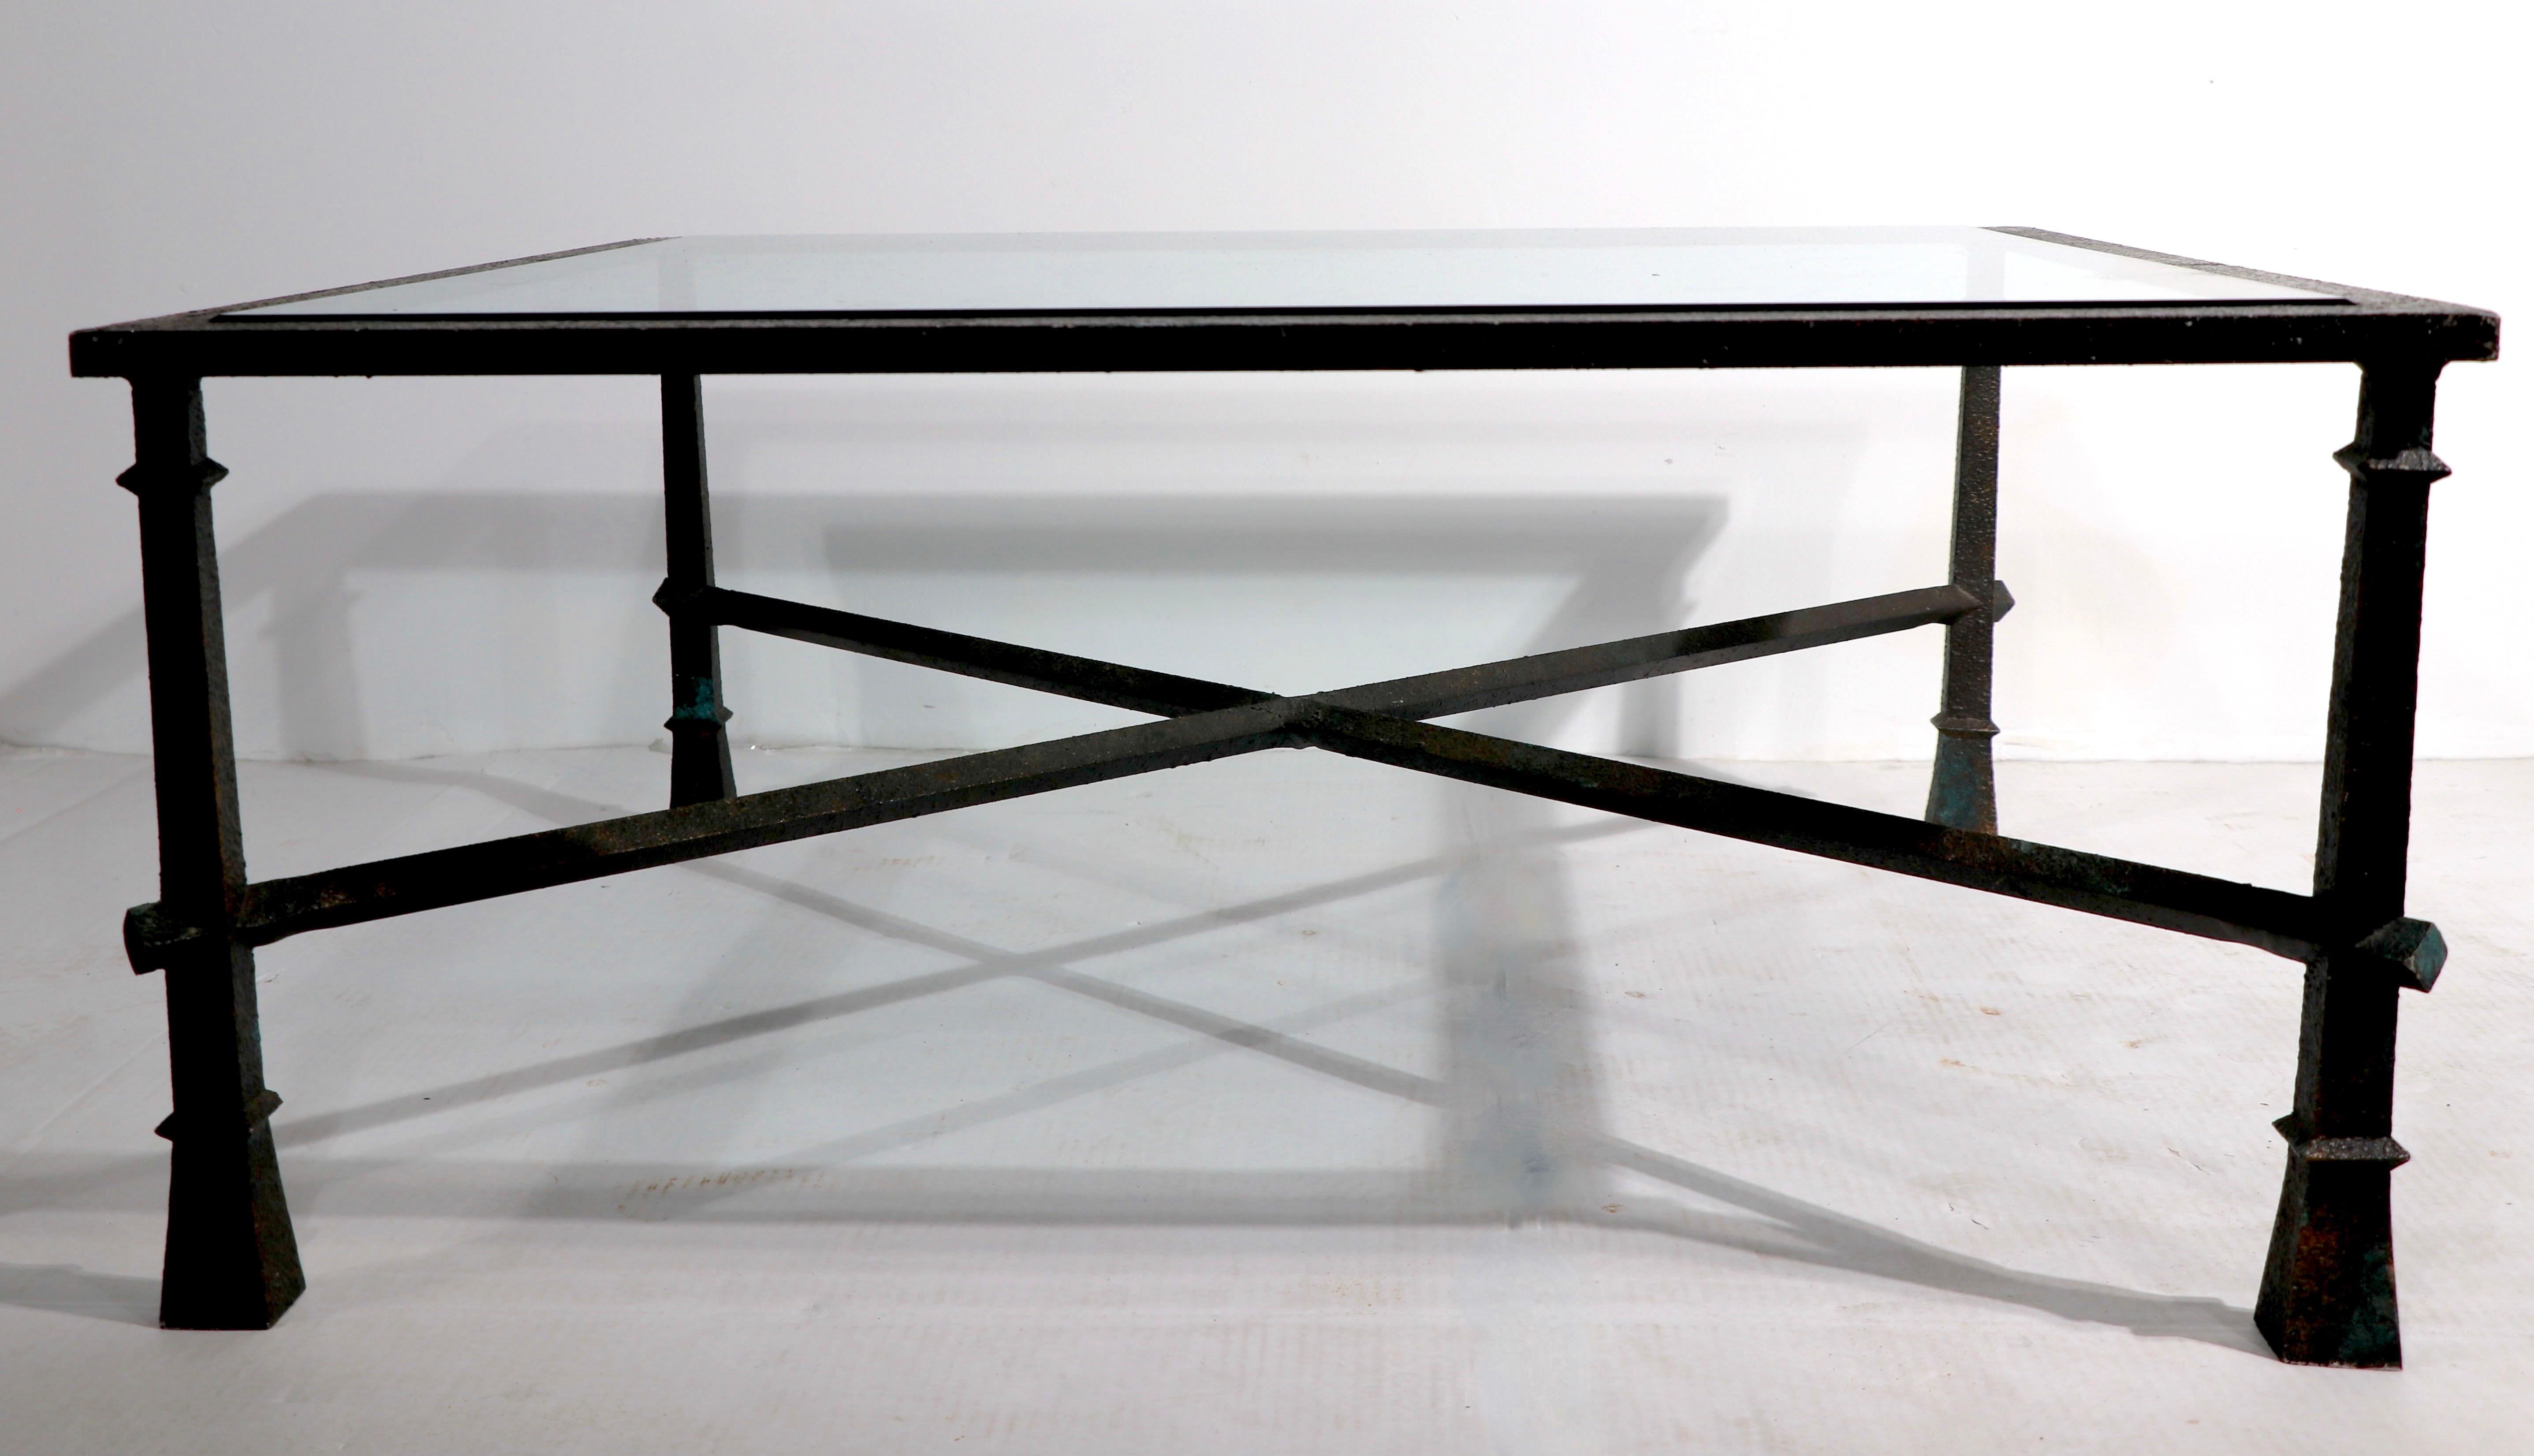 Chic architectural Brutalist coffee table in the style of Giacometti. The table has its original plate glass top, the frame is cast aluminum with faux finish. It is in very fine original condition, clean and ready to use.